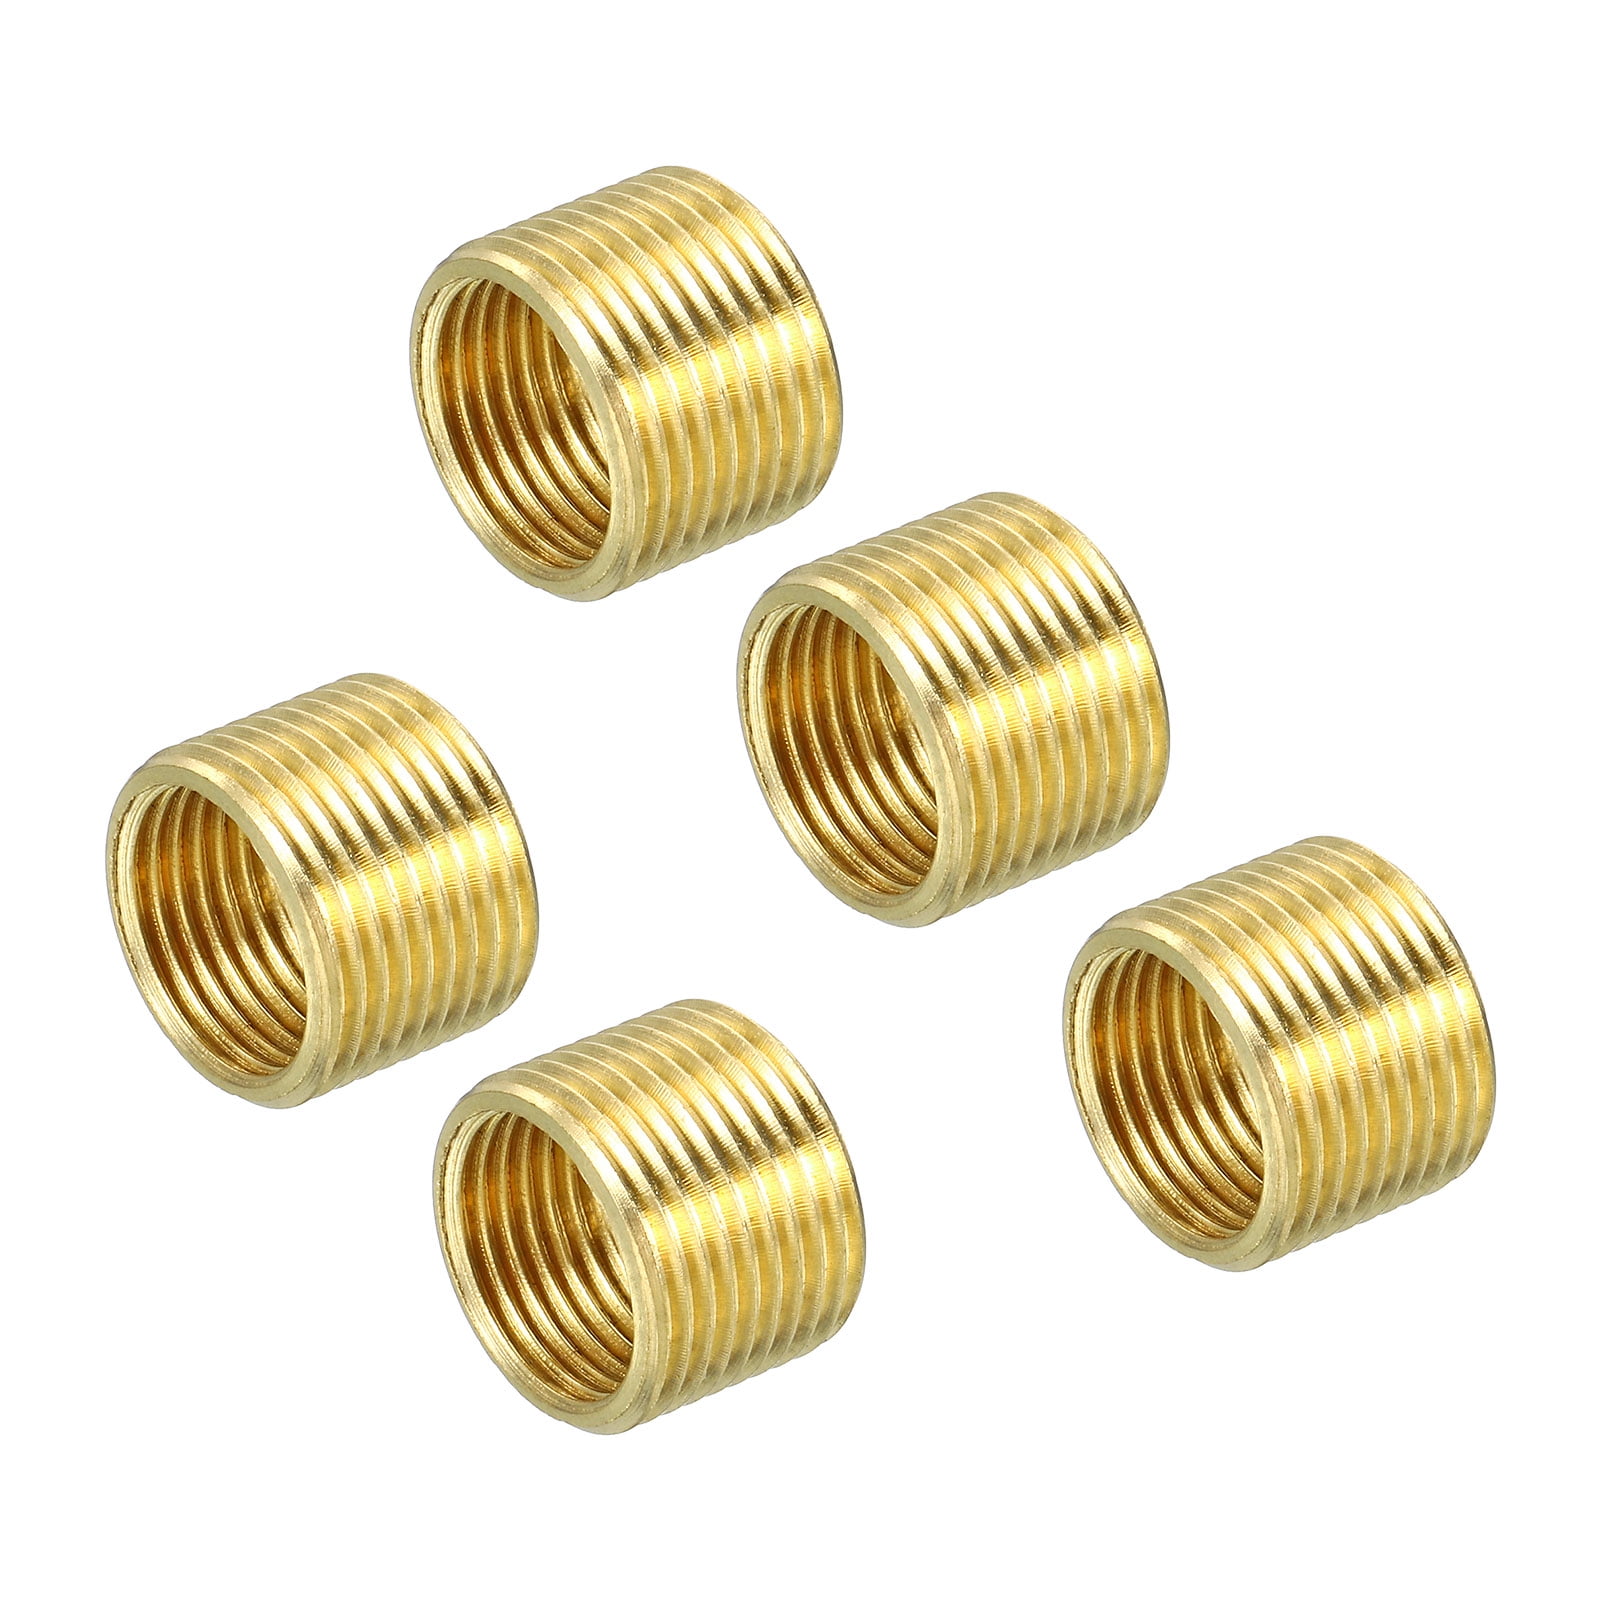 Uxcell Thread Reducing Nuts Insert M14 x 1mm Male to M12 x 1mm Female  Adapters 10mm Long Sleeve Reducer, Pack of 5 